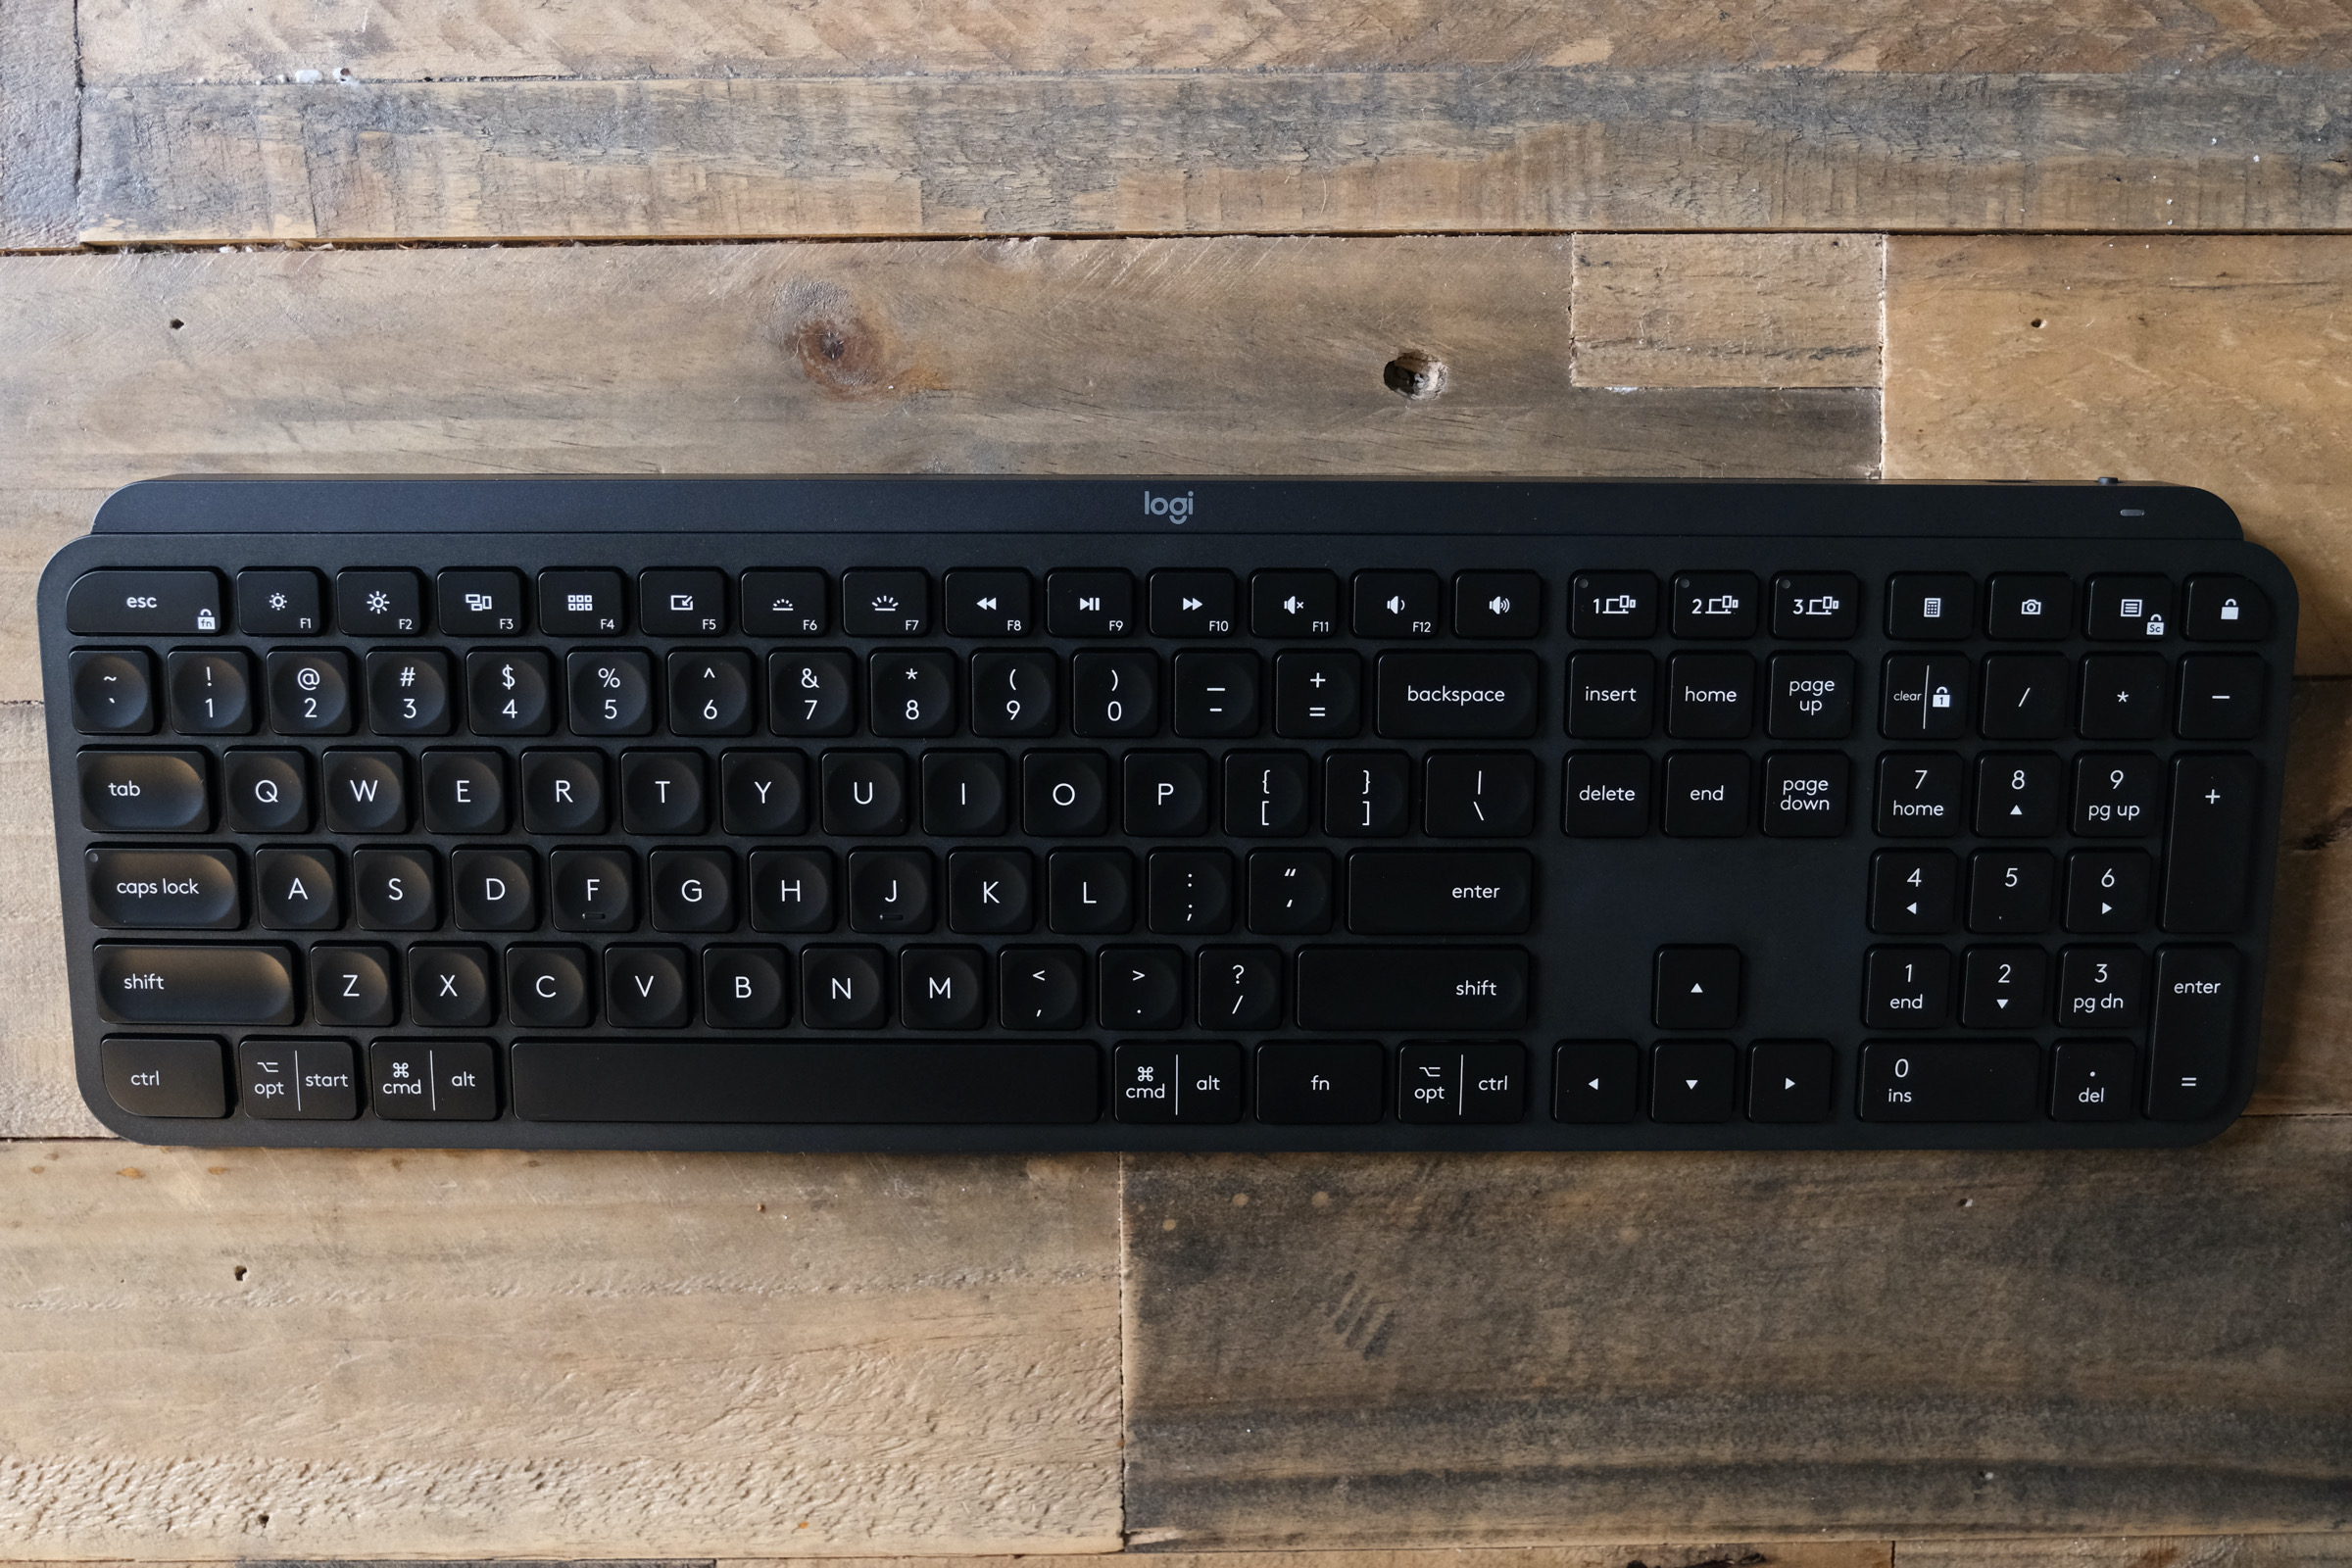 Logitech's MX Master 3 mouse and MX Keys keyboard should be your